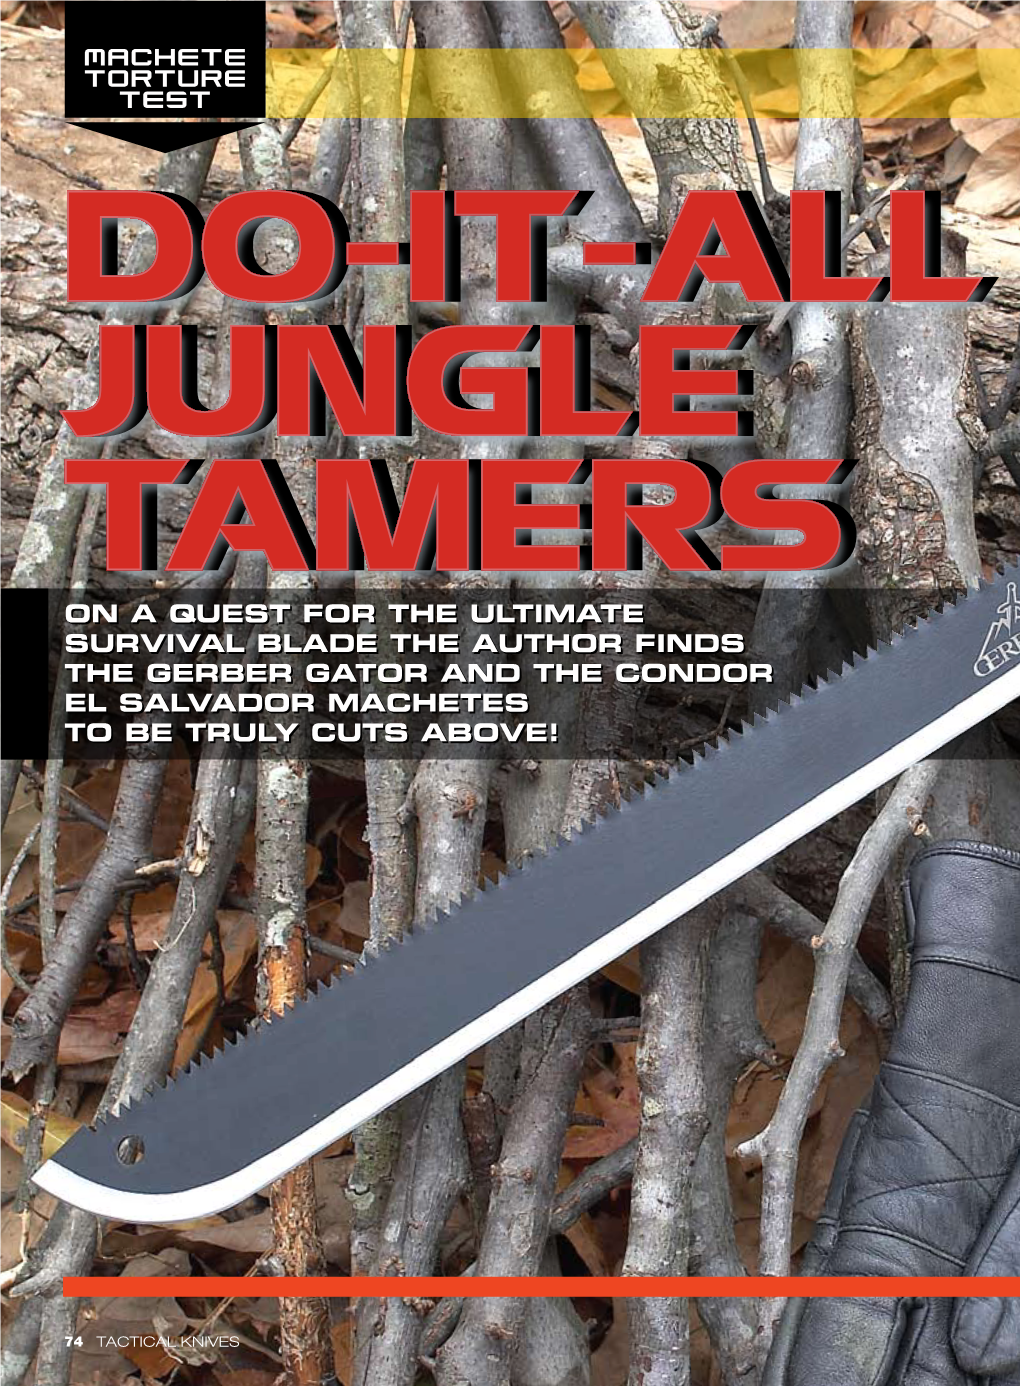 Do-It-All Jungle Tamers